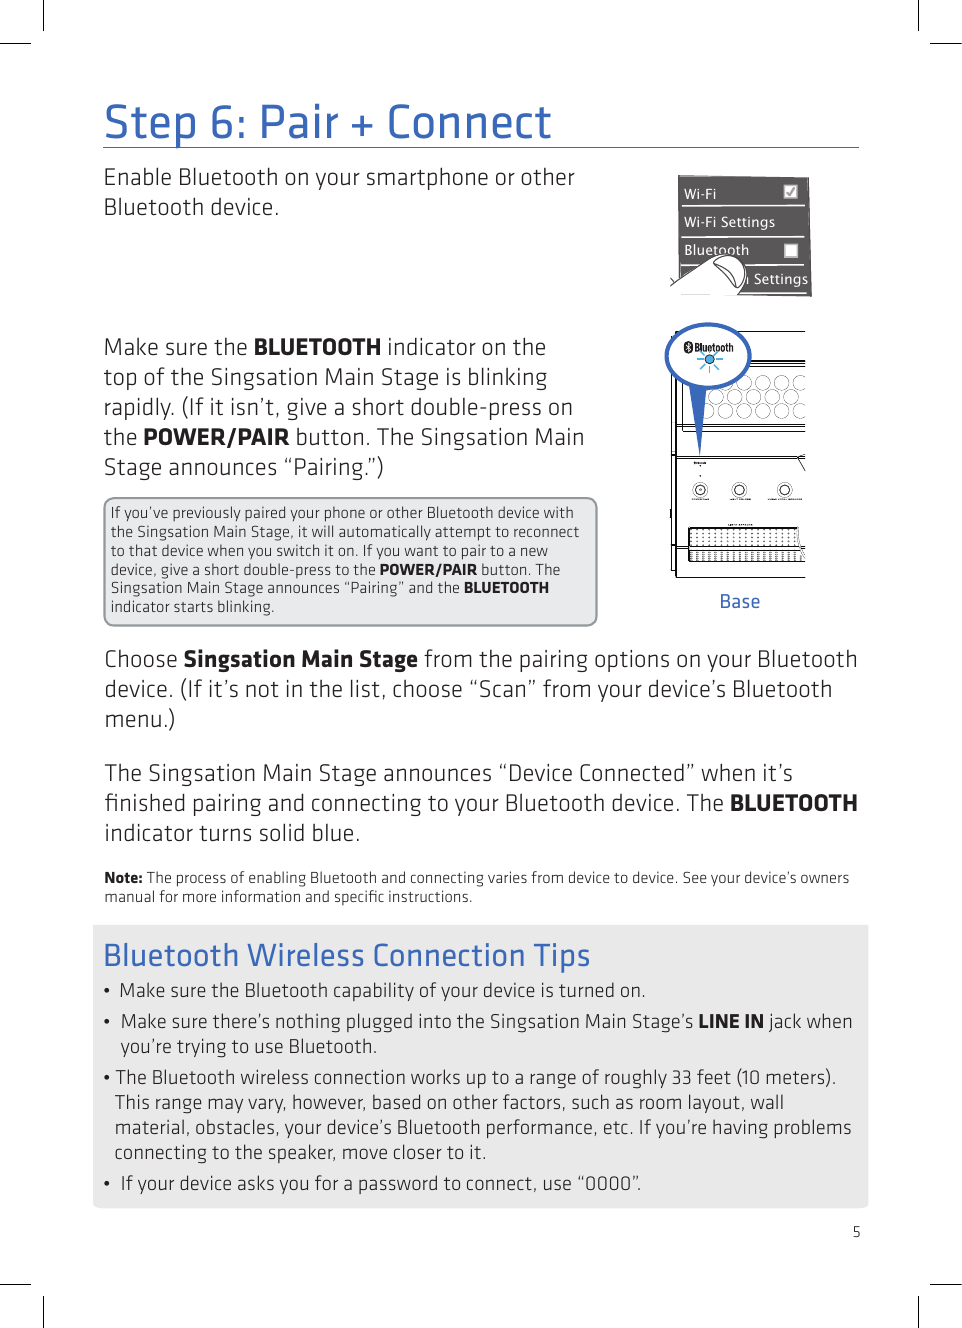 5Enable Bluetooth on your smartphone or other Bluetooth device. Step 6: Pair + ConnectWi-Fi BluetoothBluetooth SettingsVPN SettingsWi-Fi Settings8:45PMMake sure the BLUETOOTH indicator on the top of the Singsation Main Stage is blinking rapidly. (If it isn’t, give a short double-press on the POWER/PAIR button. The Singsation Main Stage announces “Pairing.”)If you’ve previously paired your phone or other Bluetooth device with the Singsation Main Stage, it will automatically attempt to reconnect to that device when you switch it on. If you want to pair to a new device, give a short double-press to the POWER/PAIR button. The Singsation Main Stage announces “Pairing” and the BLUETOOTH indicator starts blinking.Choose Singsation Main Stage from the pairing options on your Bluetooth device. (If it’s not in the list, choose “Scan” from your device’s Bluetooth menu.)The Singsation Main Stage announces “Device Connected” when it’s ﬁnished pairing and connecting to your Bluetooth device. The BLUETOOTH indicator turns solid blue.Note: The process of enabling Bluetooth and connecting varies from device to device. See your device’s owners manual for more information and speciﬁc instructions.Bluetooth Wireless Connection Tips•  Make sure the Bluetooth capability of your device is turned on.•  Make sure there’s nothing plugged into the Singsation Main Stage’s LINE IN jack when you’re trying to use Bluetooth.• The Bluetooth wireless connection works up to a range of roughly 33 feet (10 meters). This range may vary, however, based on other factors, such as room layout, wall material, obstacles, your device’s Bluetooth performance, etc. If you’re having problems connecting to the speaker, move closer to it. •  If your device asks you for a password to connect, use “0000”.Base